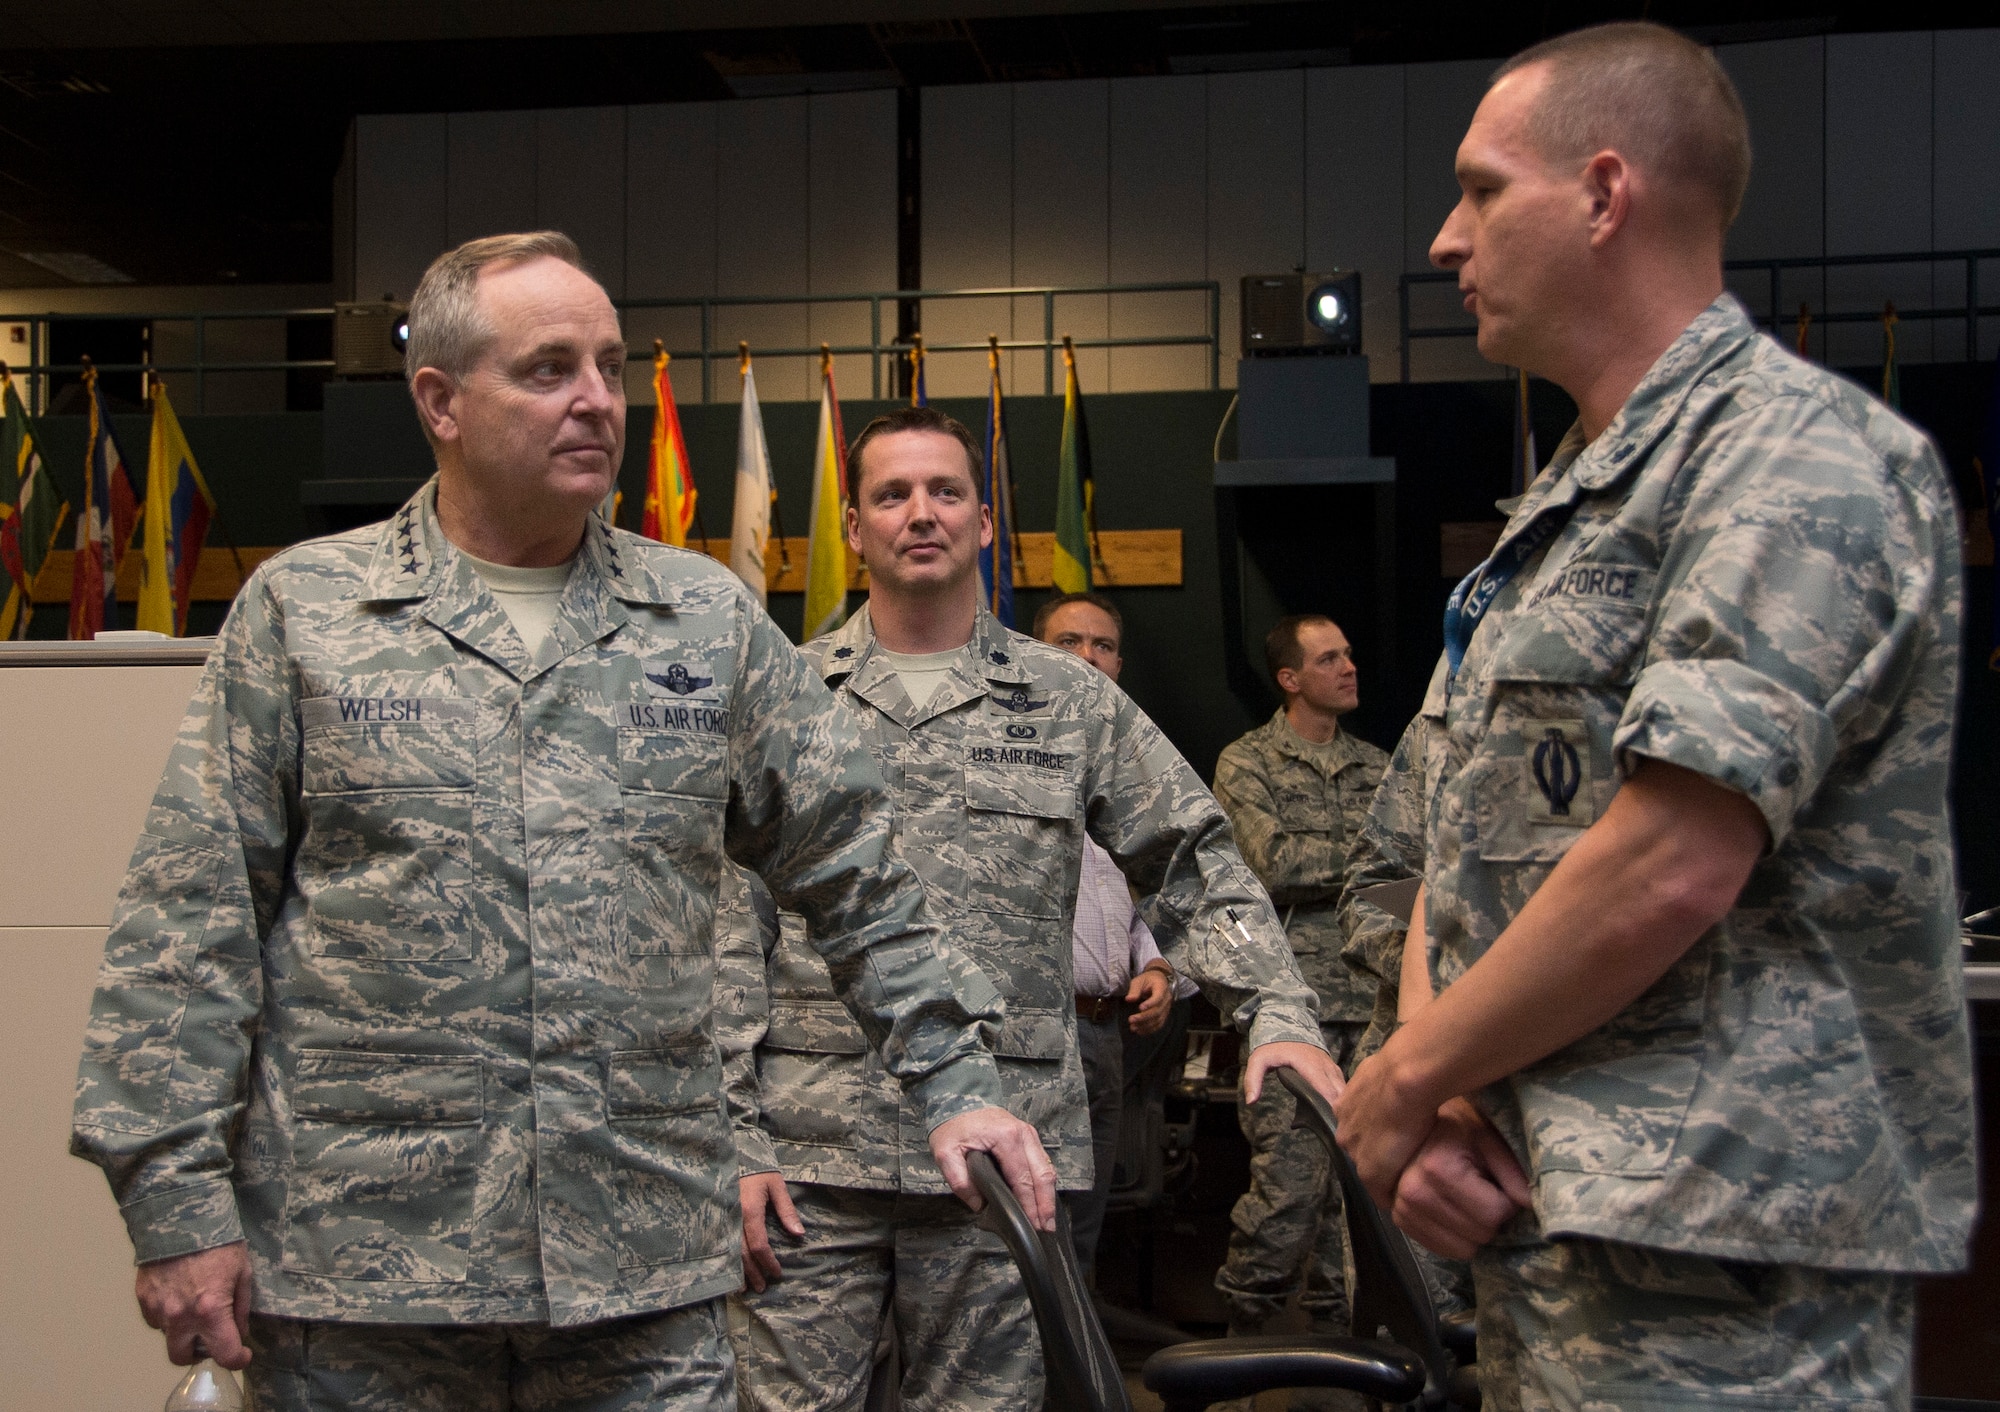 Air Force Chief of Staff Gen. Mark A. Welsh III, receives a brief from Lt. Col John Ferko, Air Forces Southern chief of special tactical operations, during a visit to the 612th Air Operations Center on March 25, 2015 at Davis-Monthan AFB, Ariz. During the visit, Welsh engaged with both leadership and Airmen during a base-wide all call. (U.S. Air Force photo by Staff Sgt. Adam Grant/Released)